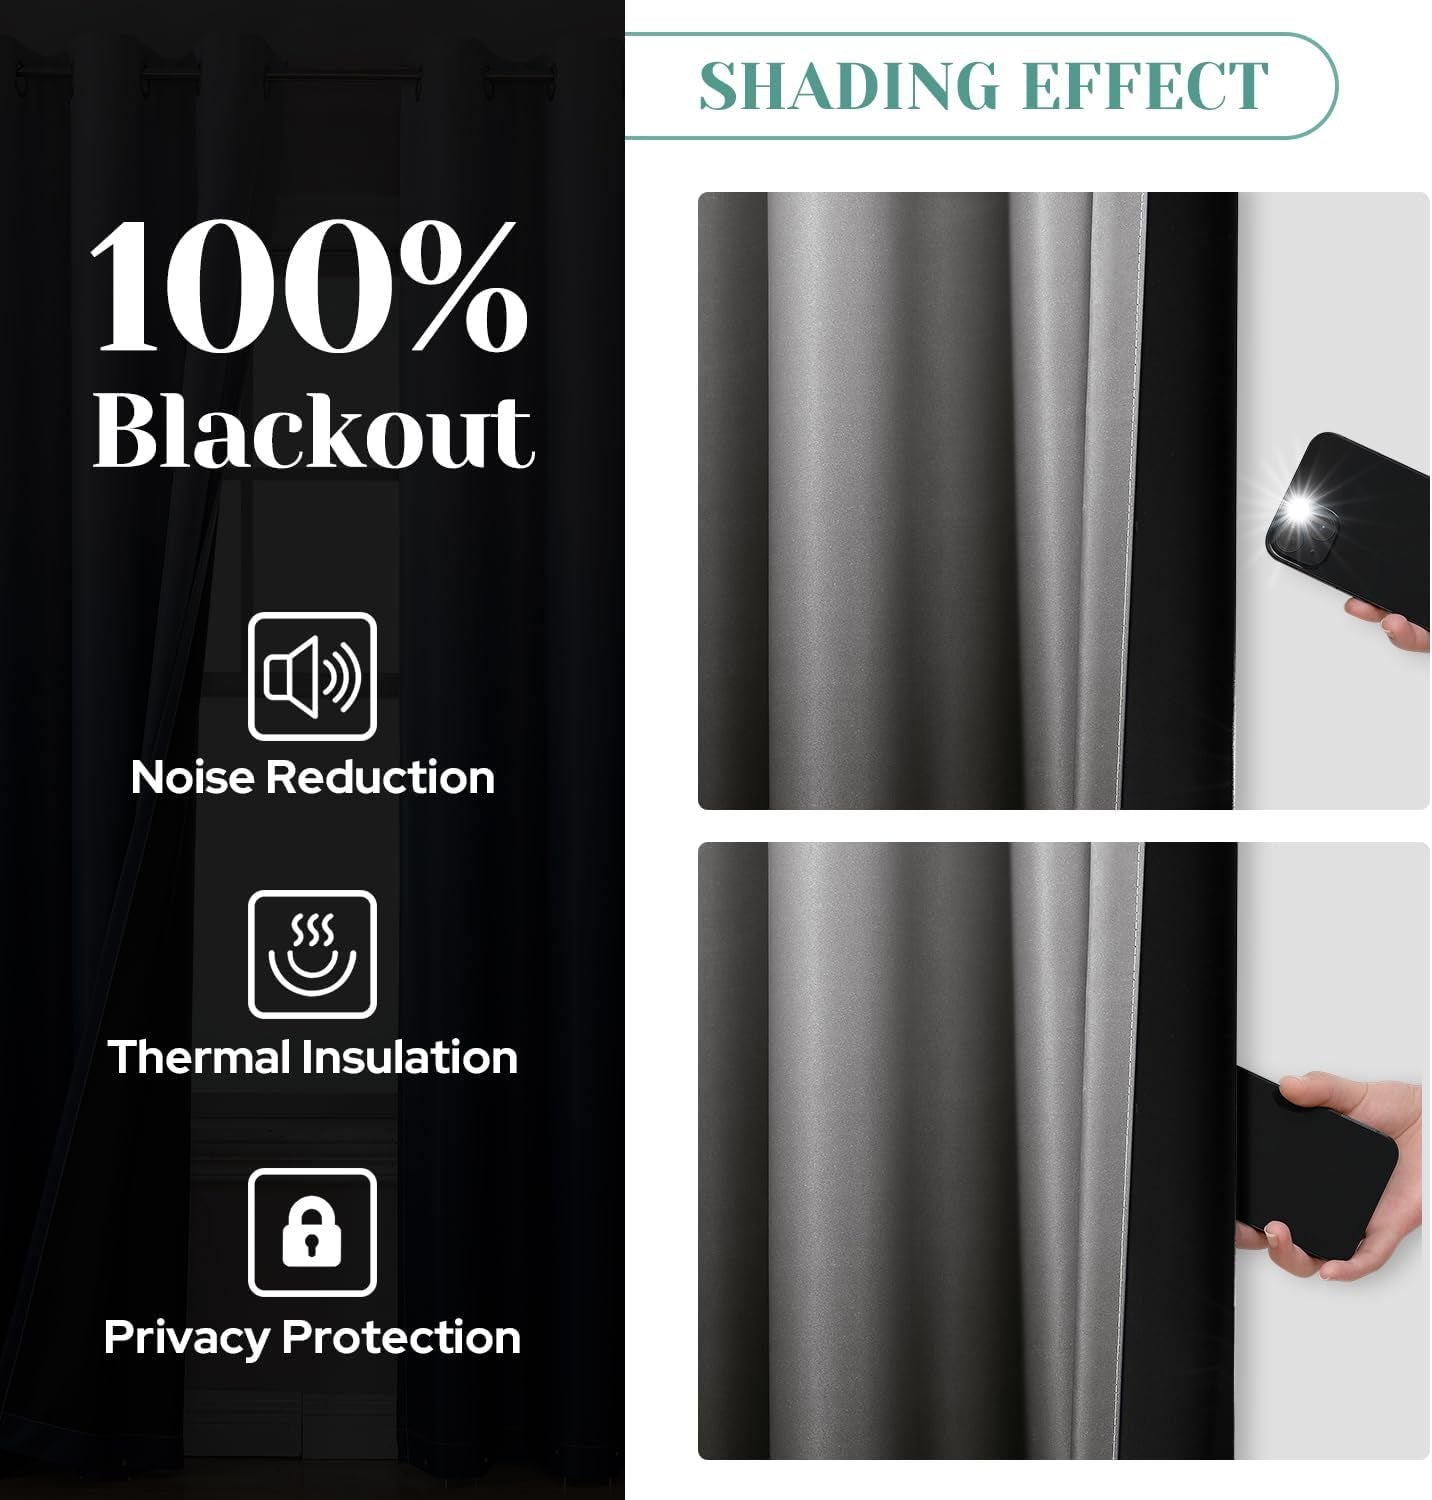 HOMEIDEAS 100% Black Ombre Blackout Curtains for Bedroom, Room Darkening Curtains 52 X 84 Inches Long Grommet Gradient Drapes, Light Blocking Thermal Insulated Curtains for Living Room, 2 Panels  HOMEIDEAS   